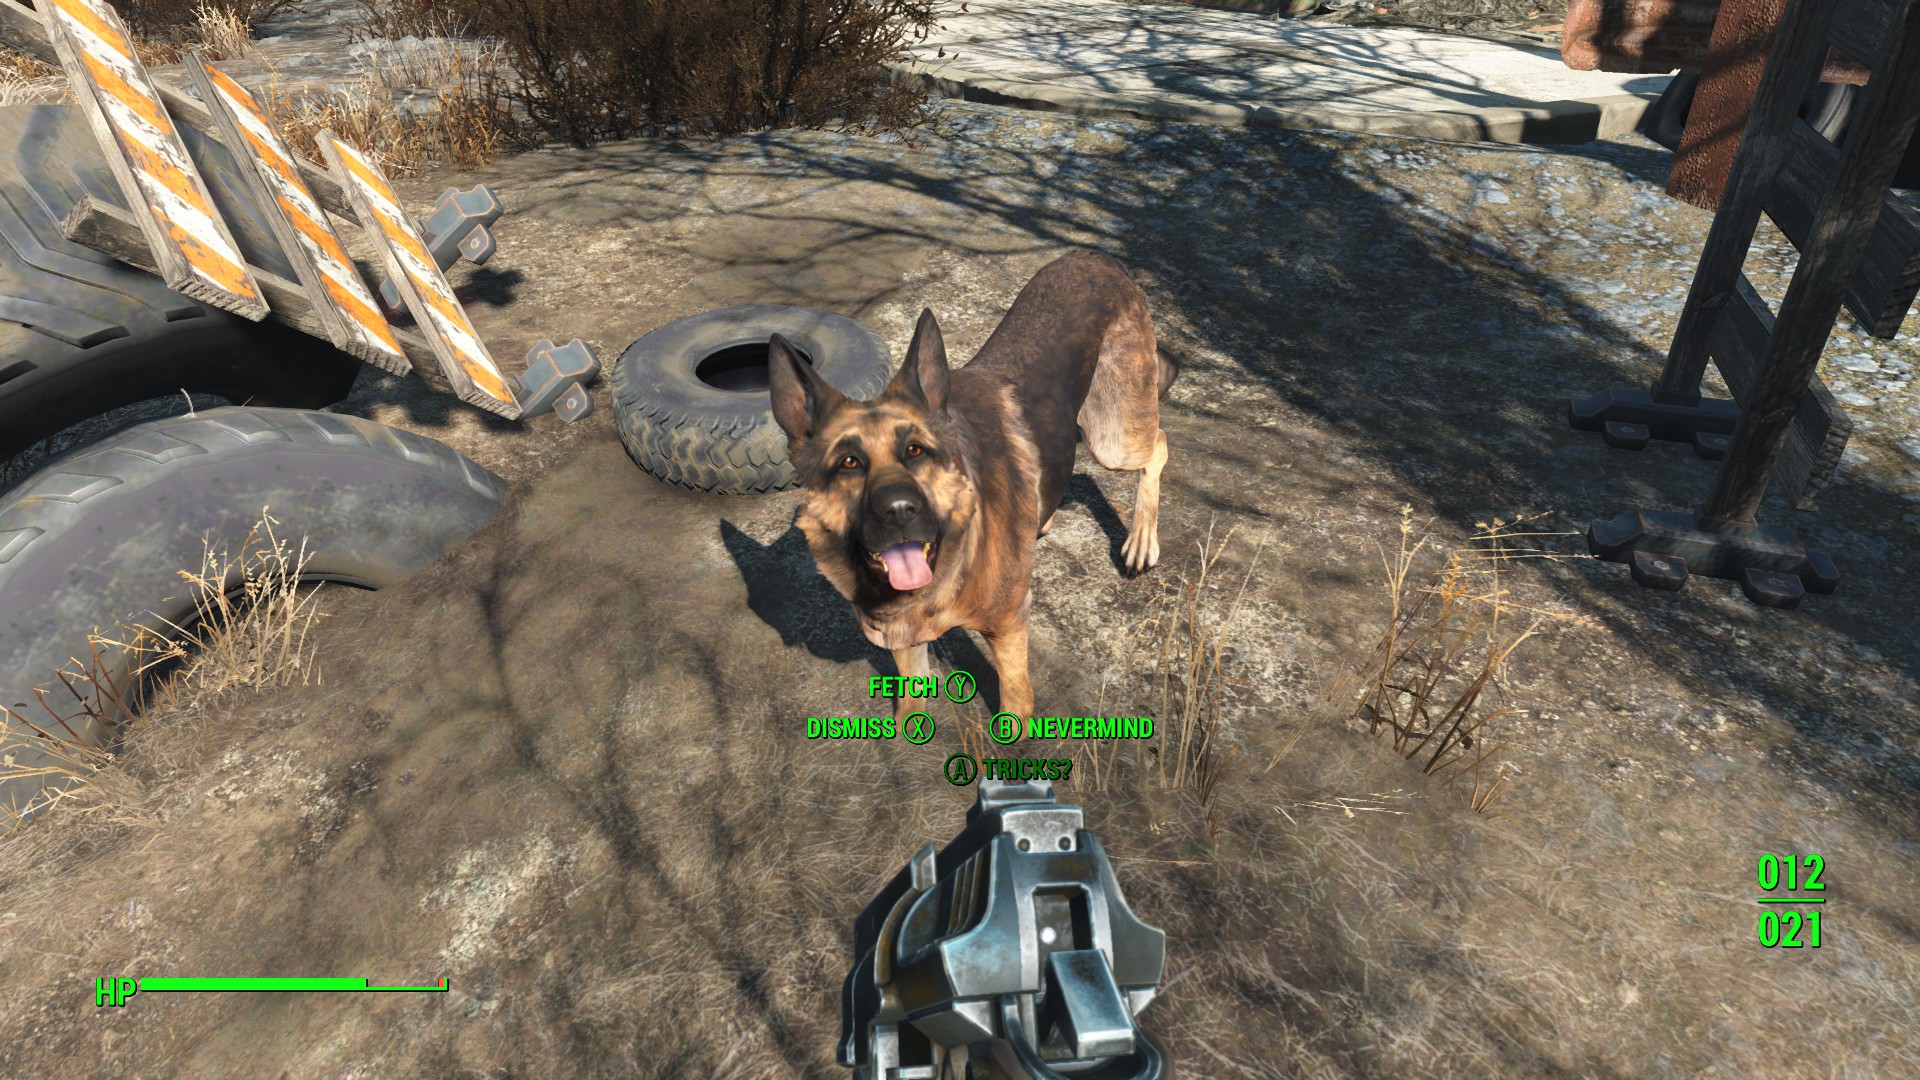 November Fallout 4 Update: We Know Far